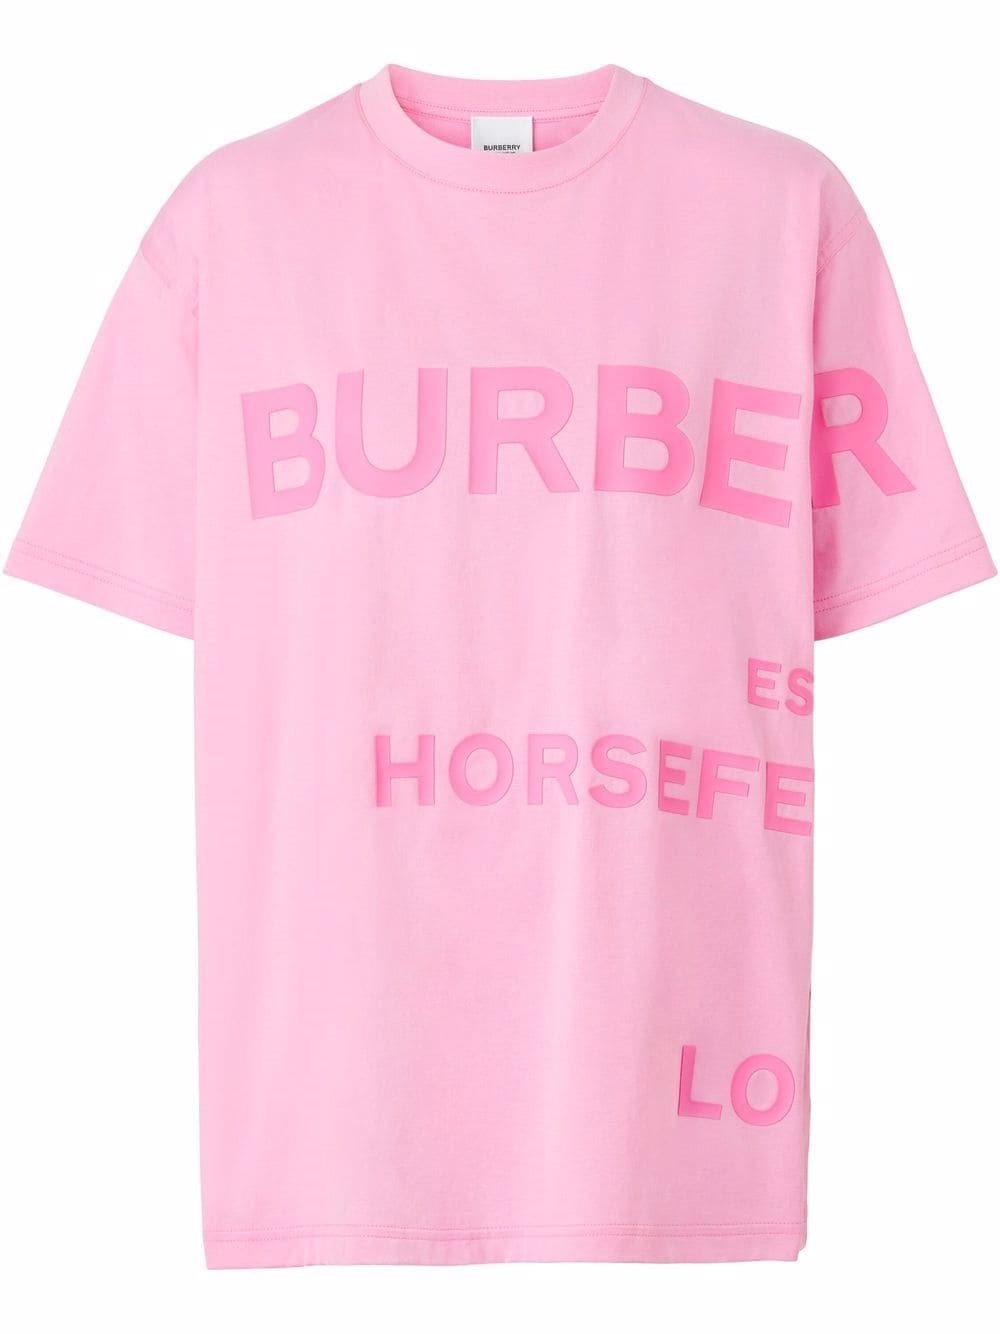 burberry T-SHIRT available on montiboutique.com - 46830